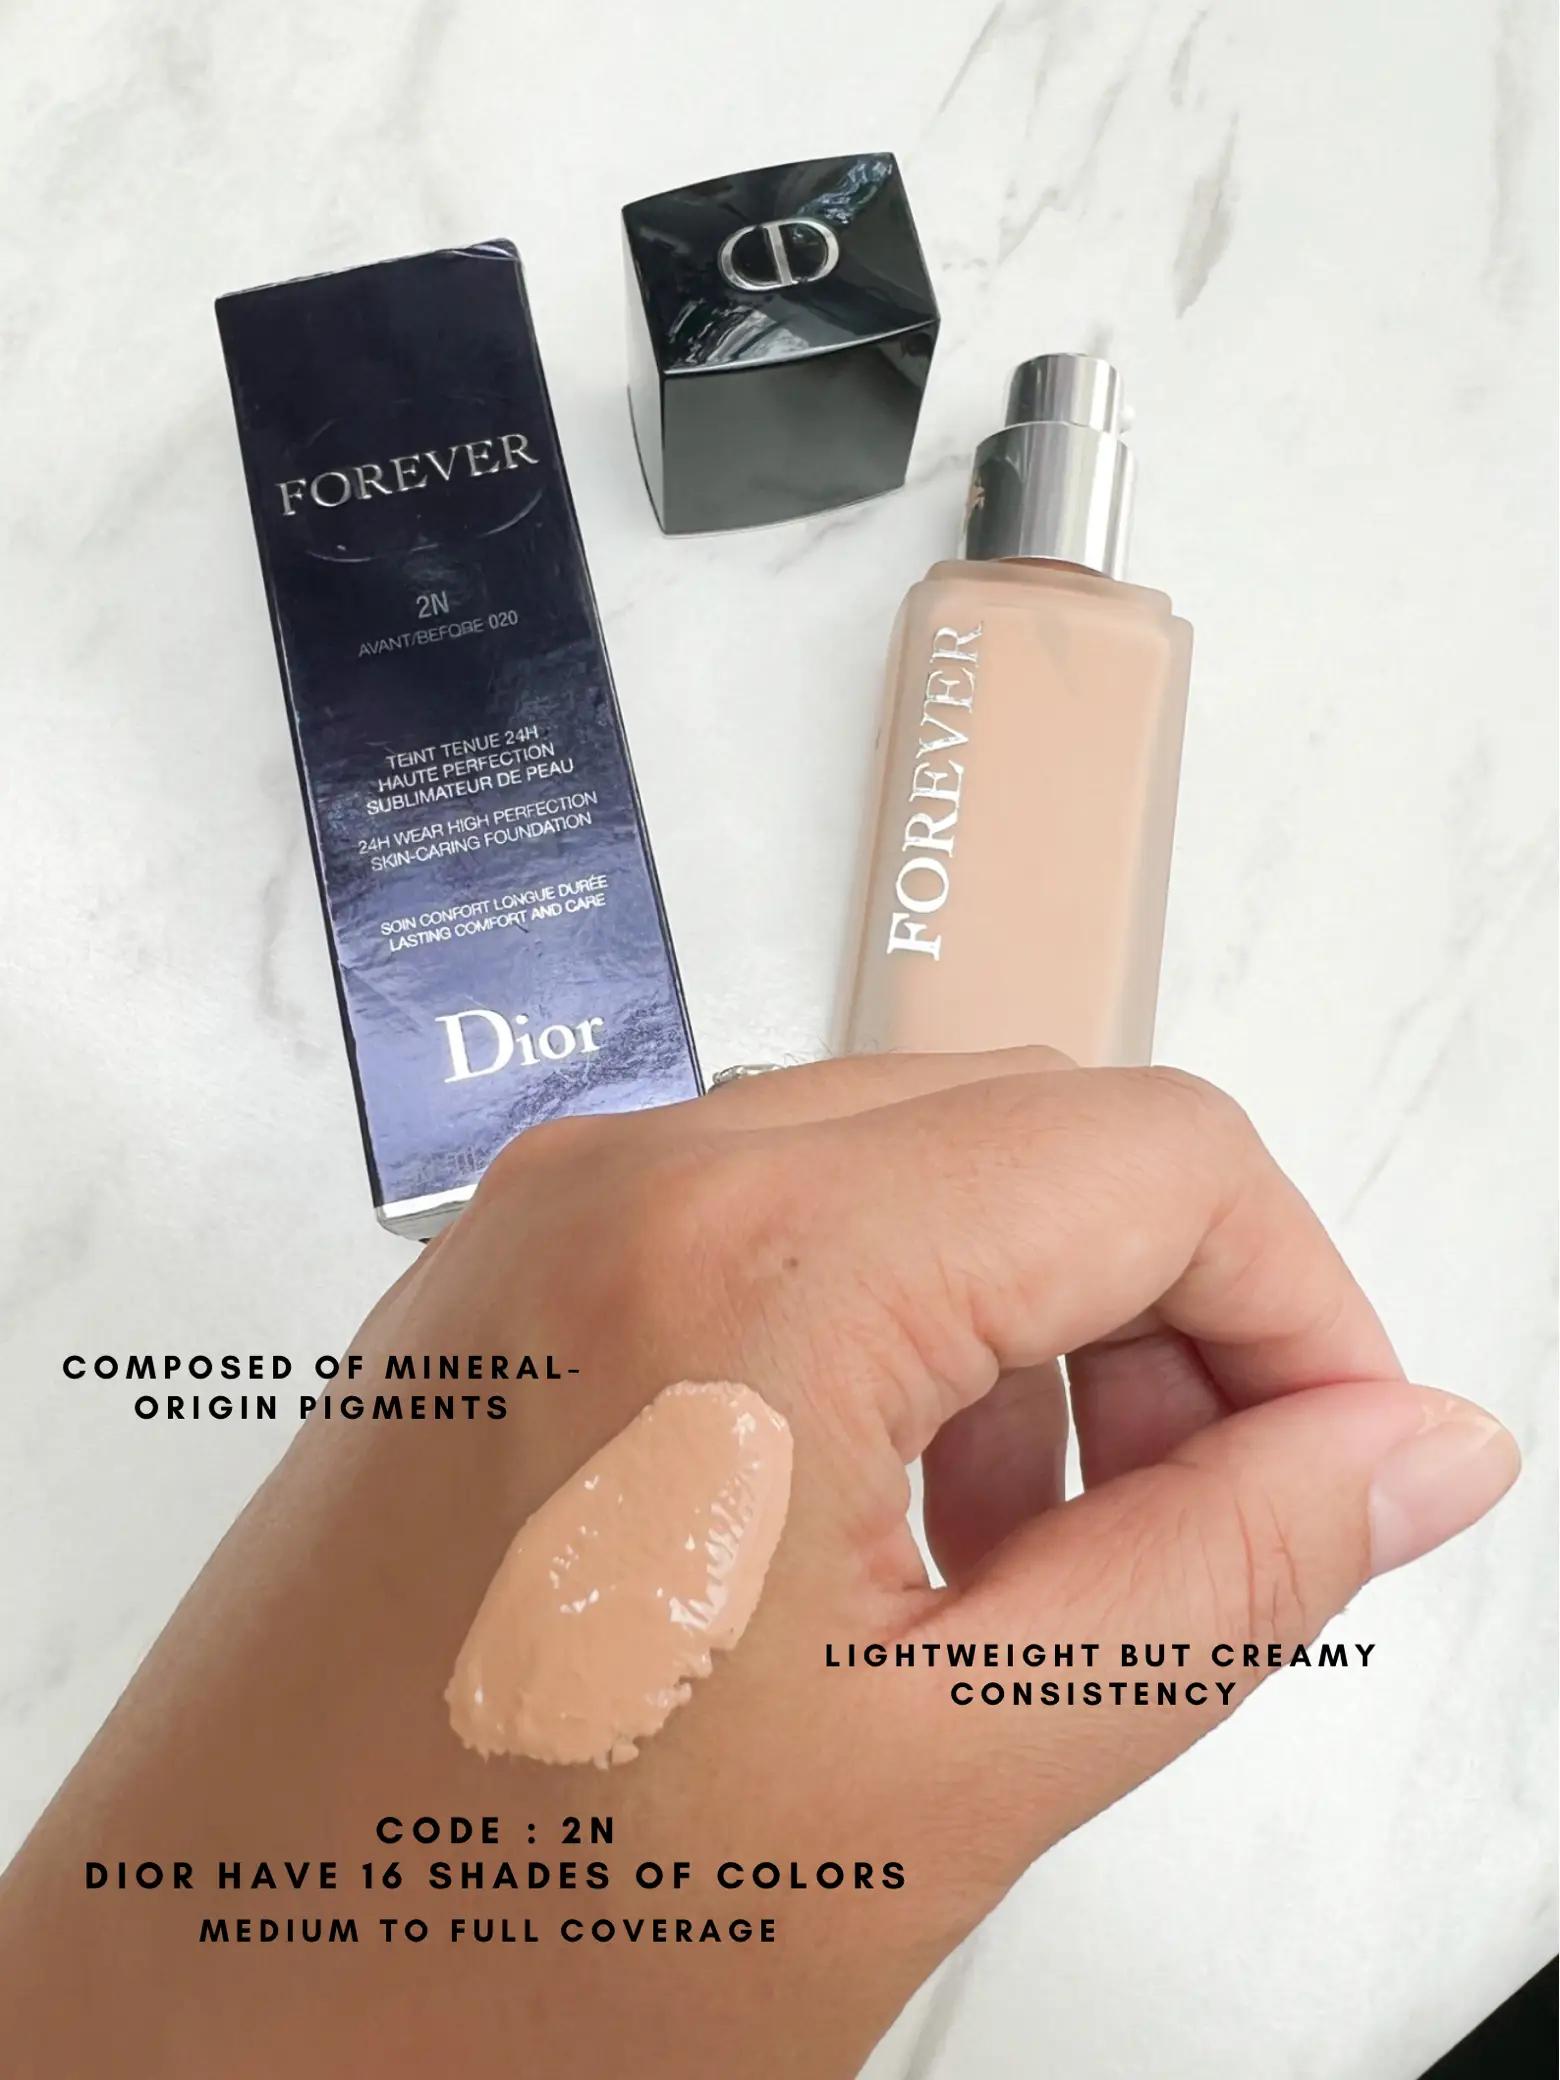 Dior Forever Foundation: Review and Swatches 🦋, Gallery posted by Munirah